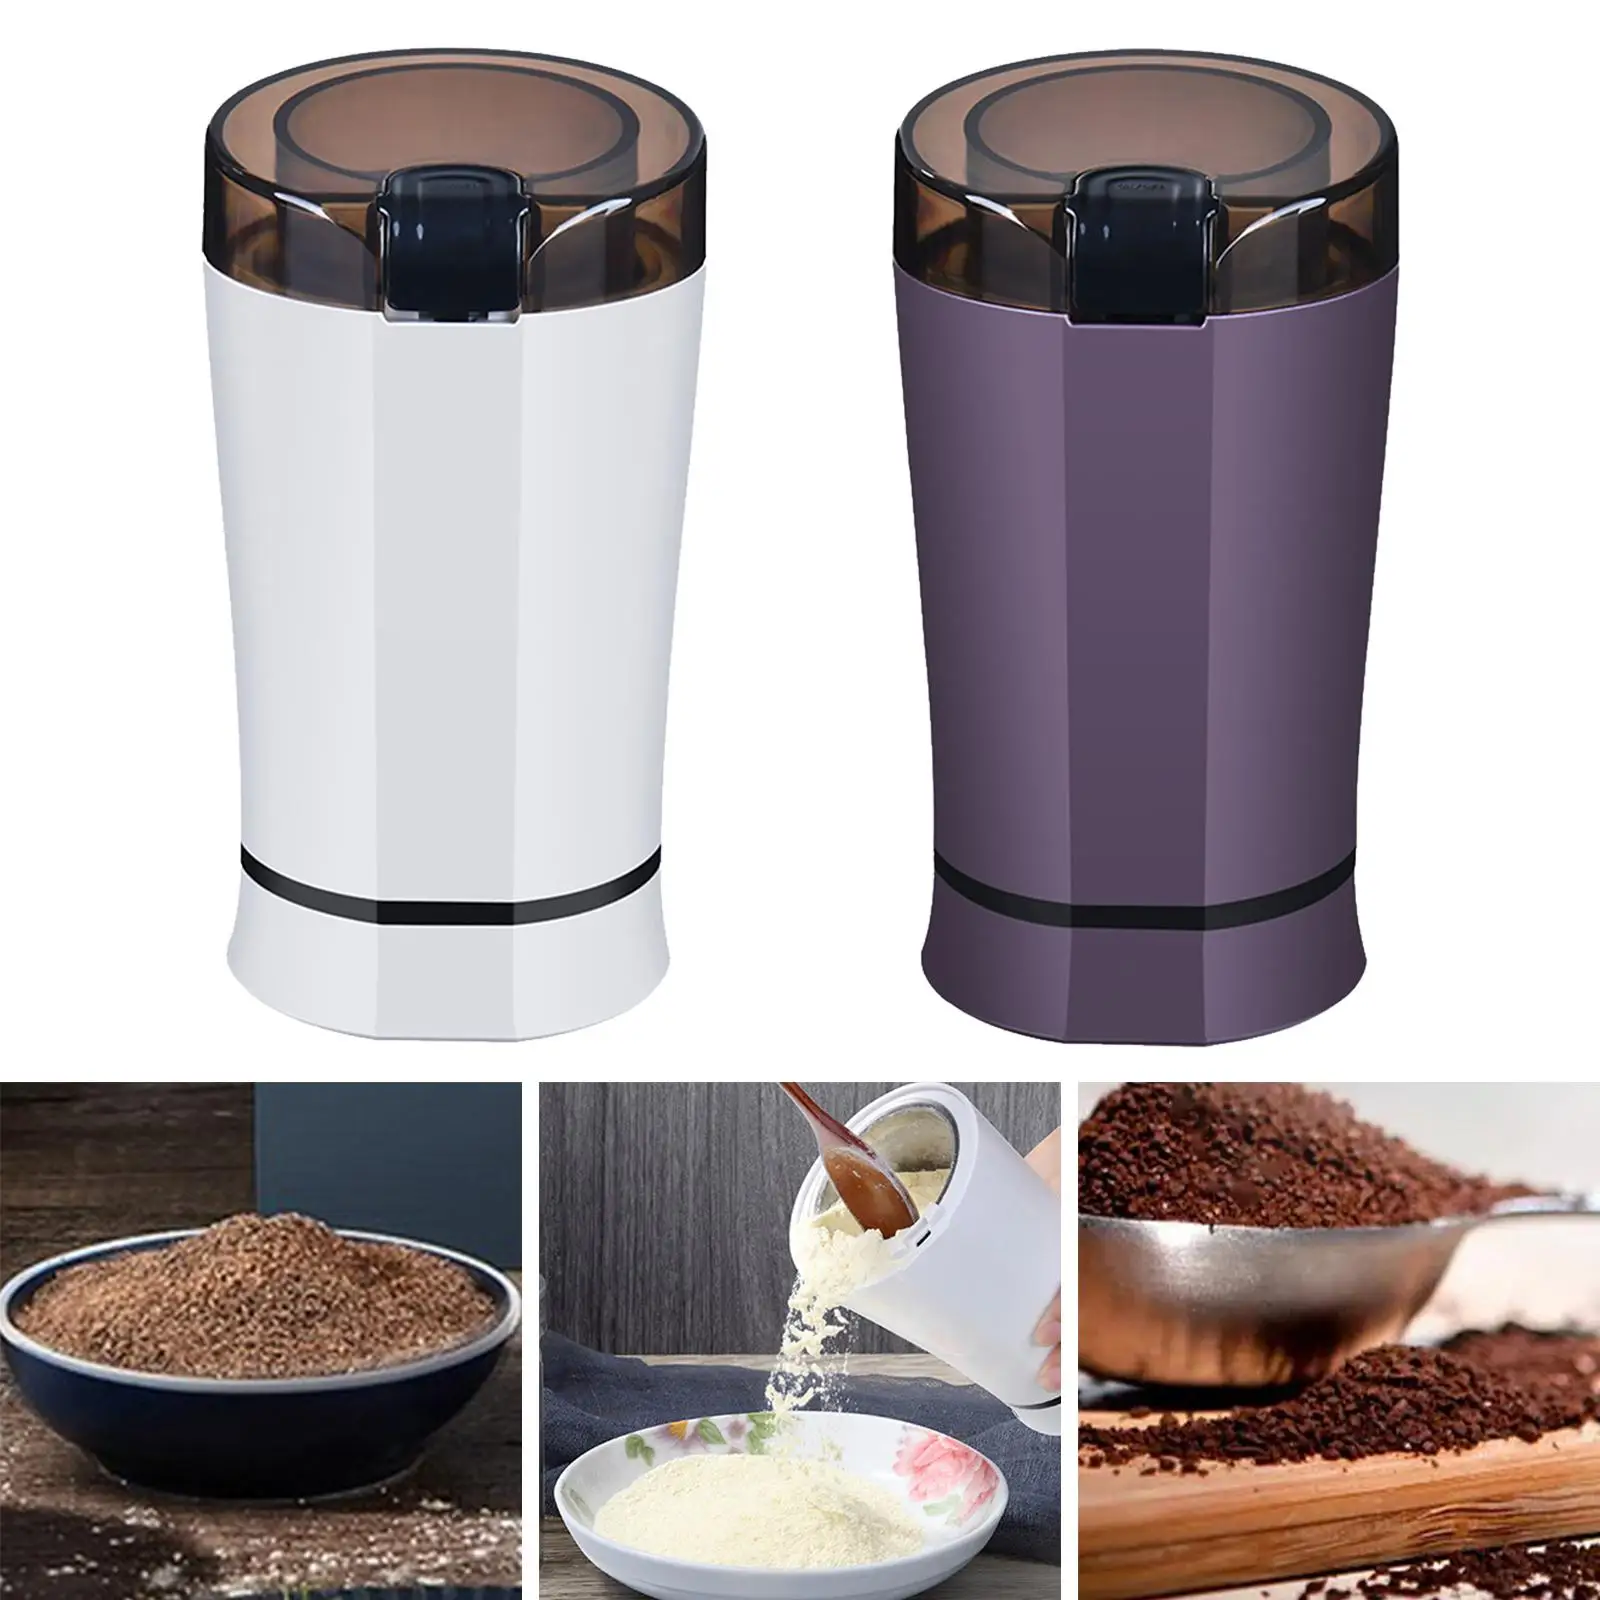 Multifunctional Electric Grinding Machine Kitchen Grain Mill Coffee Grinder for Coffee Bean